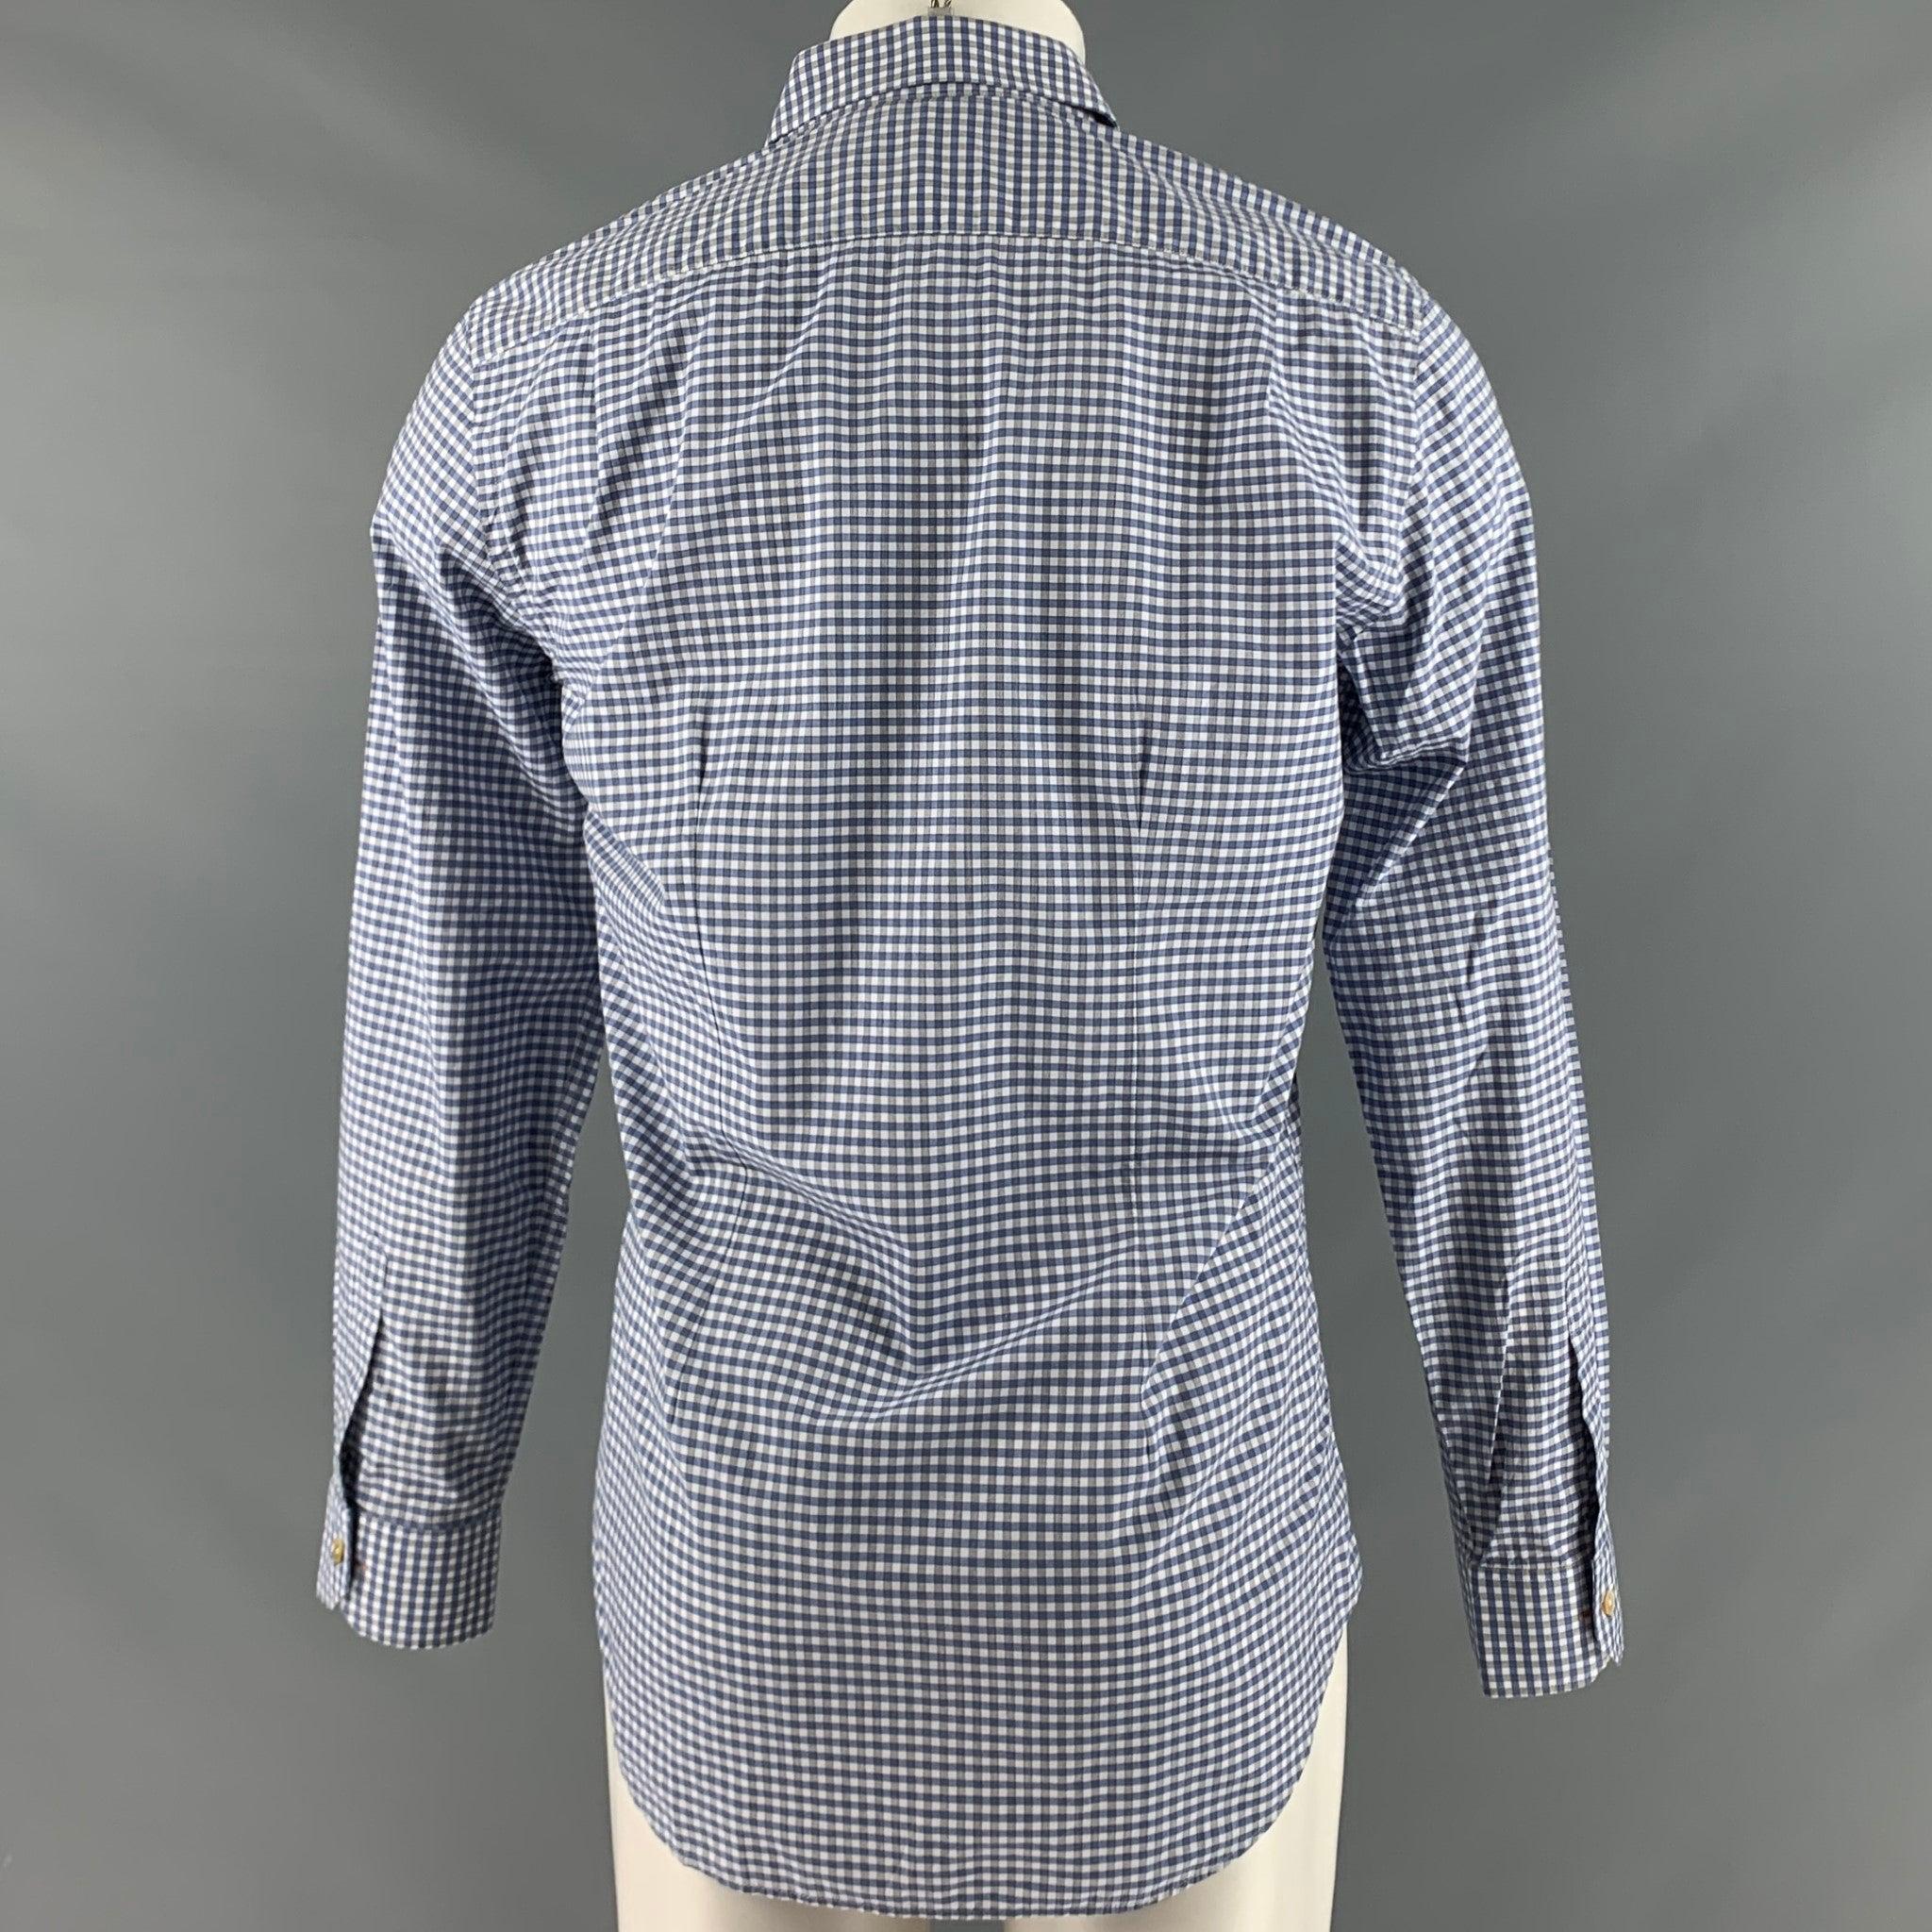 PAUL SMITH Size M Blue White Gingham Cotton Long Sleeve Shirt In Good Condition For Sale In San Francisco, CA